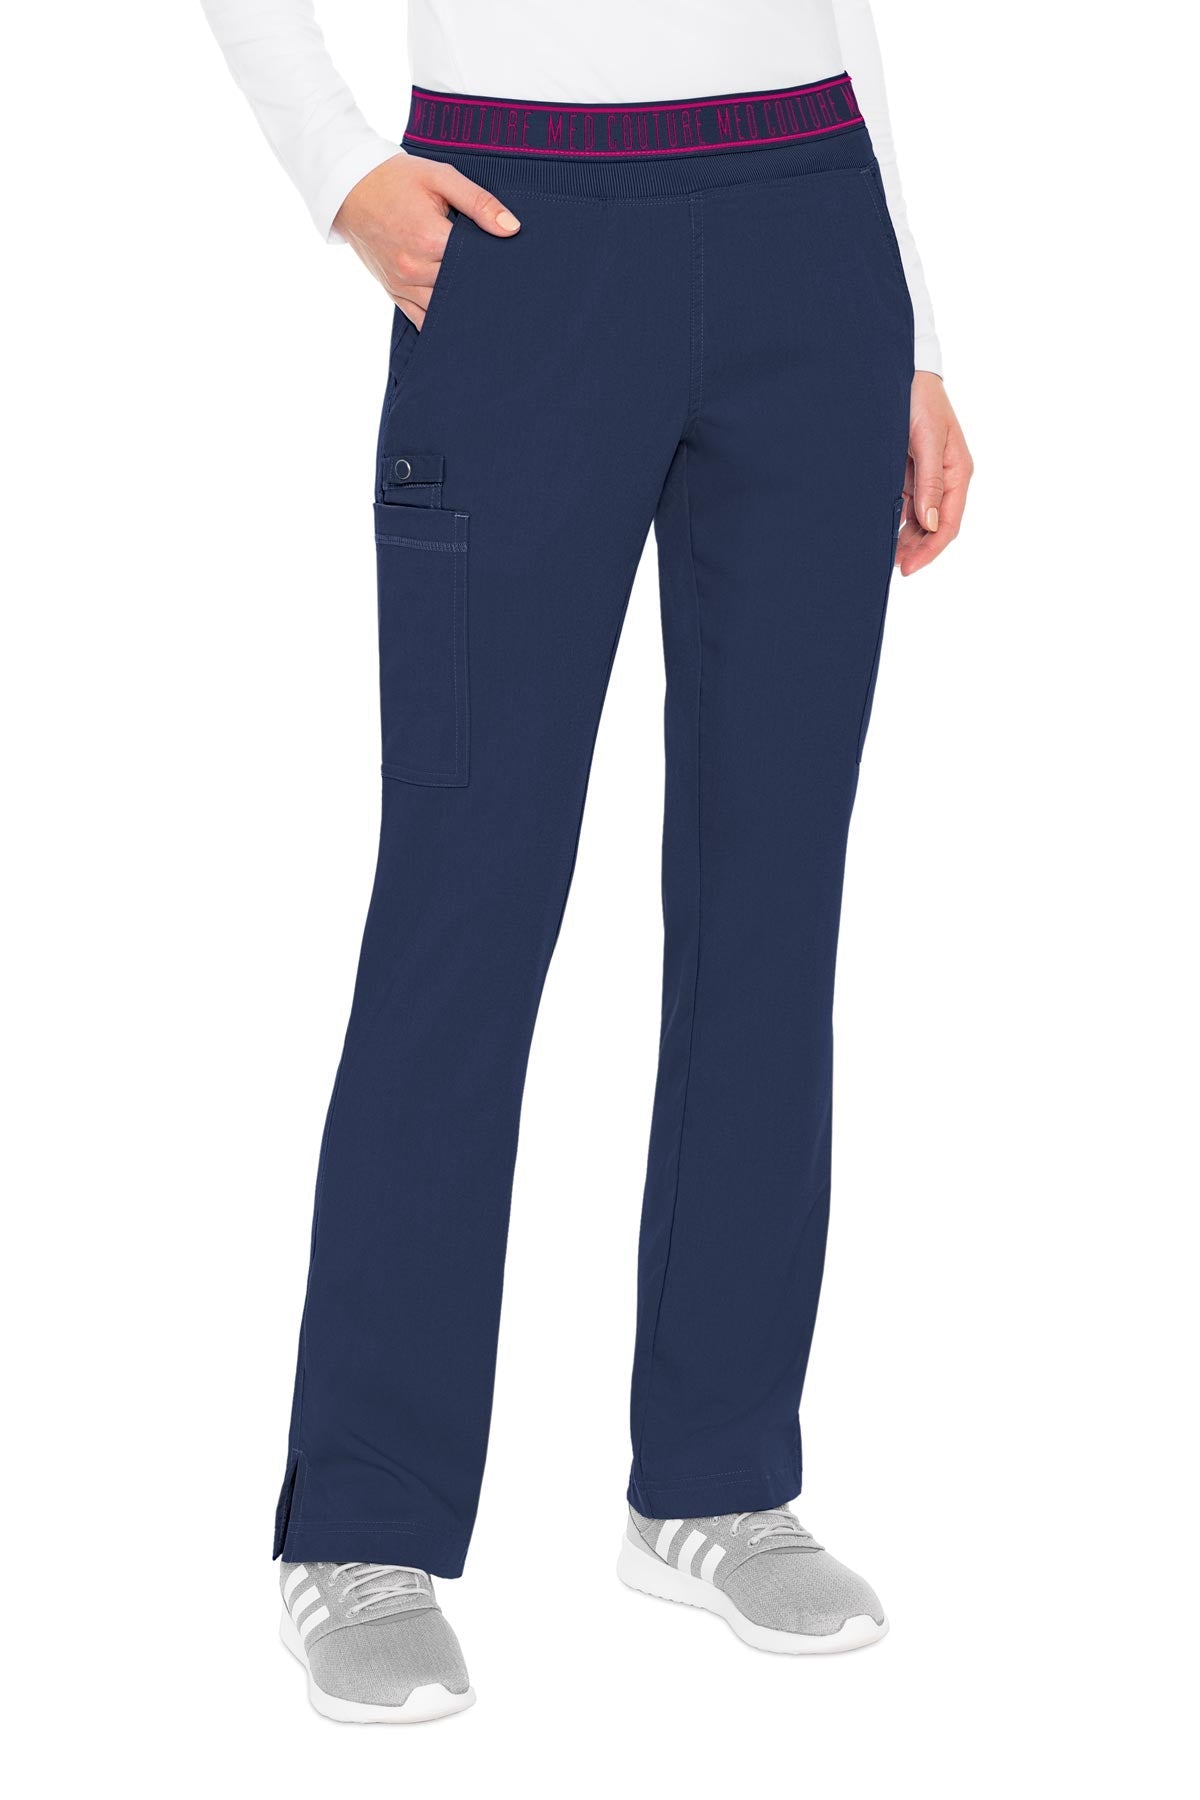 MED COUTURE Yoga 2 Cargo Pocket Pant PLUS